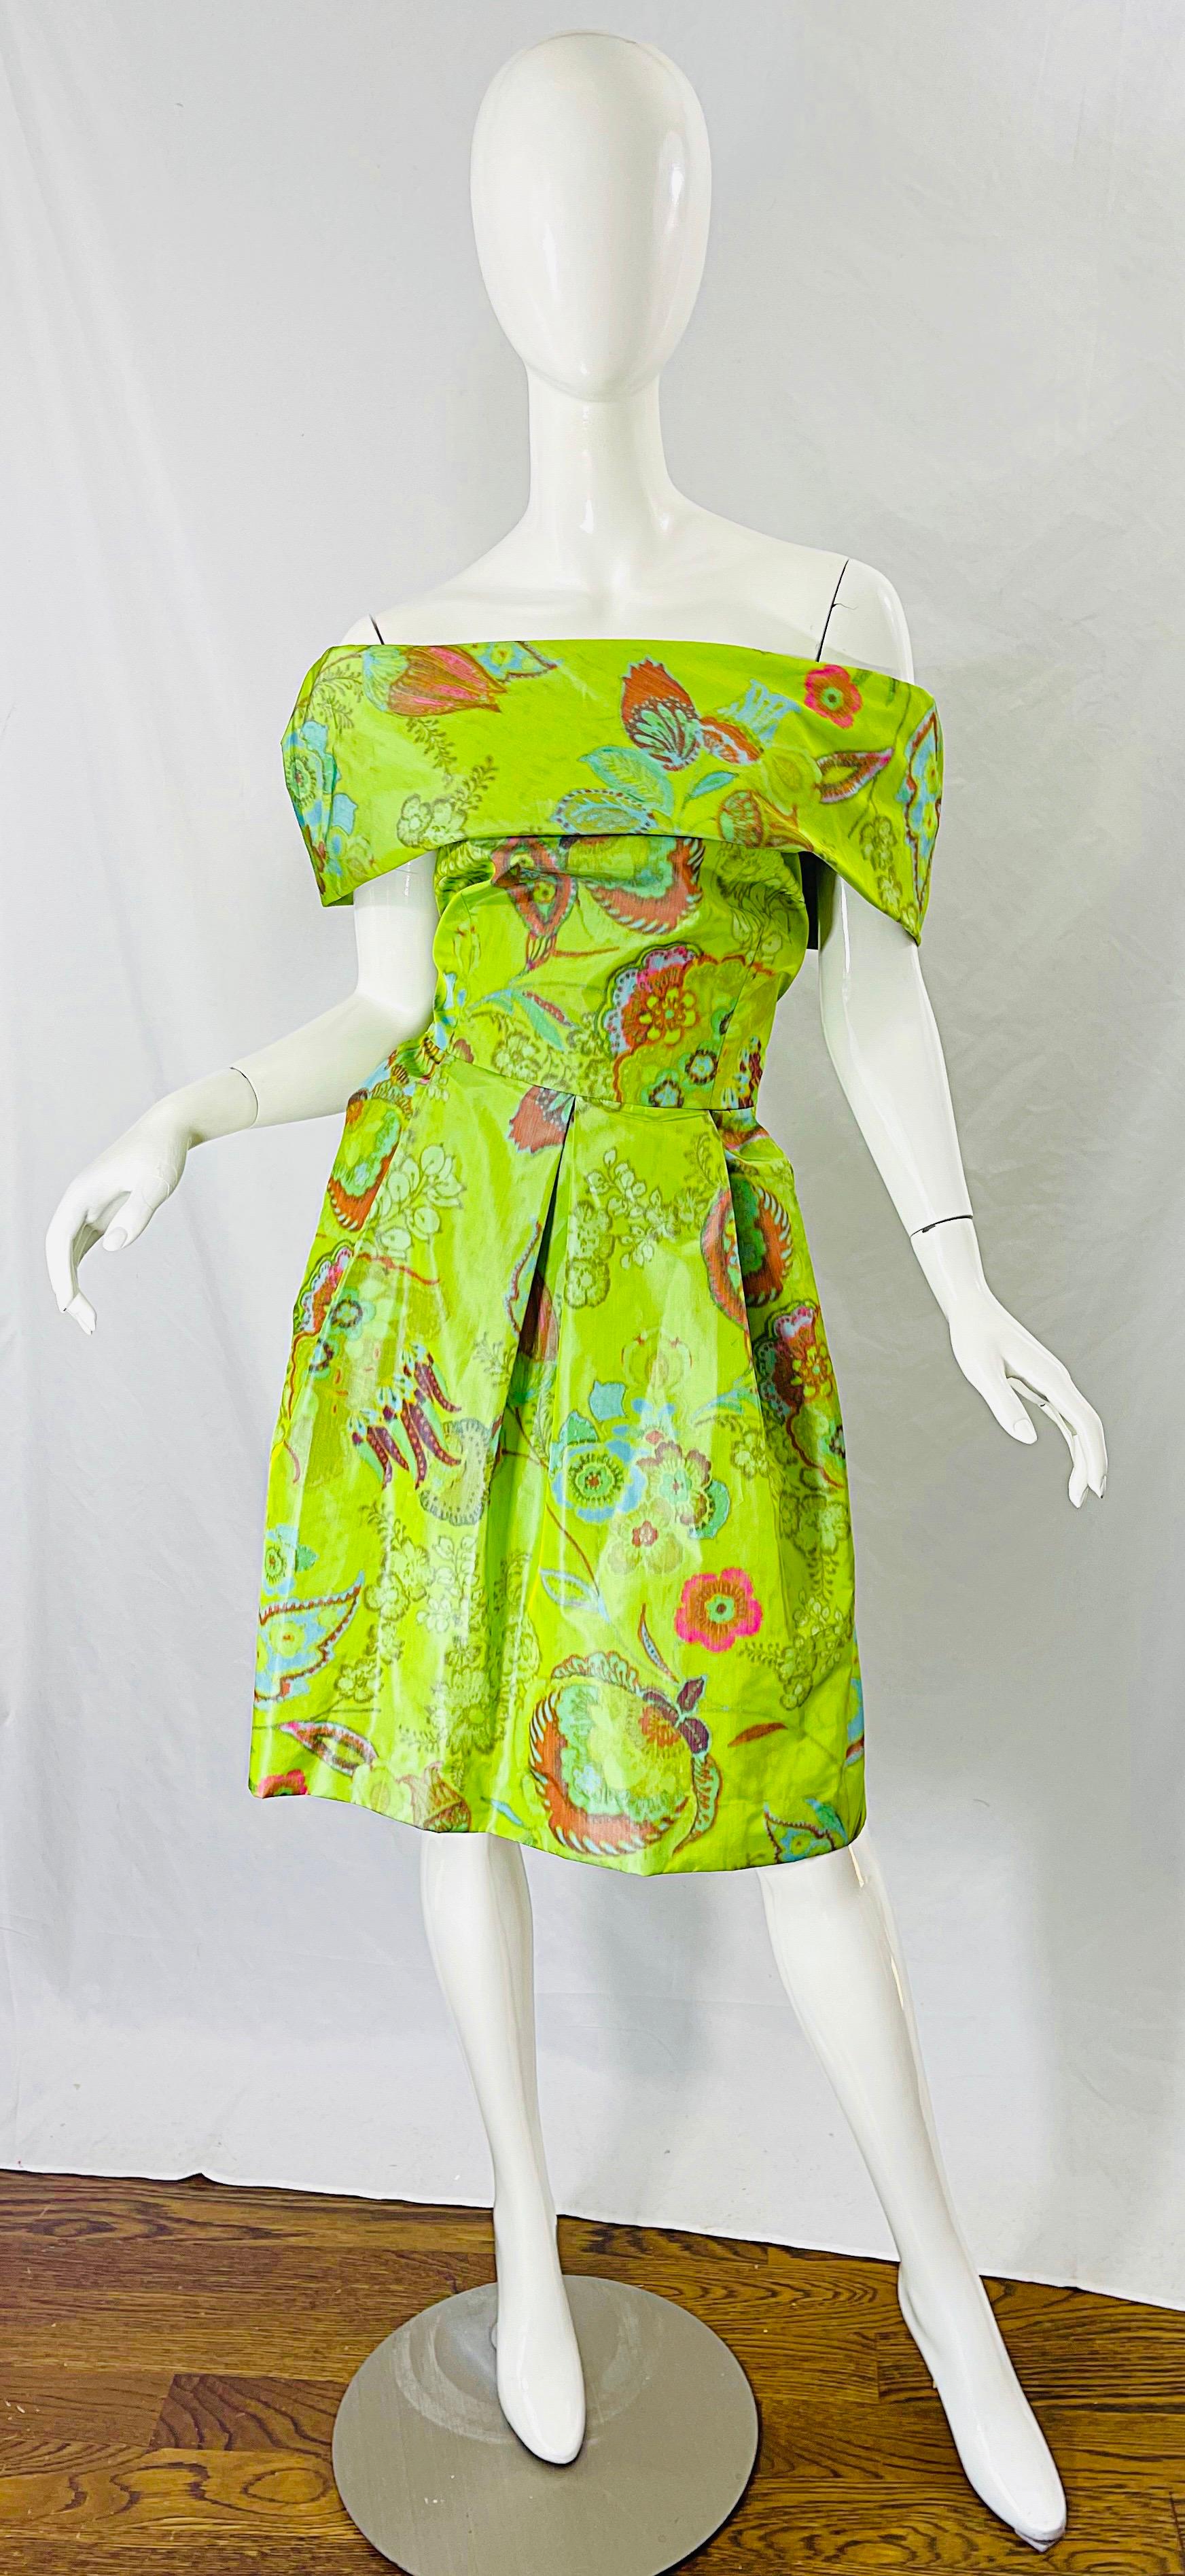 Gorgeous LEE ALEXANDER 90s silk taffeta off the shoulder neon green cocktail dress ! Features wonderful prints of flowers and paisley in blue, pink, and orange throughout. Hidden zipper up the back. Pockets at each side of the hips. Couture quality